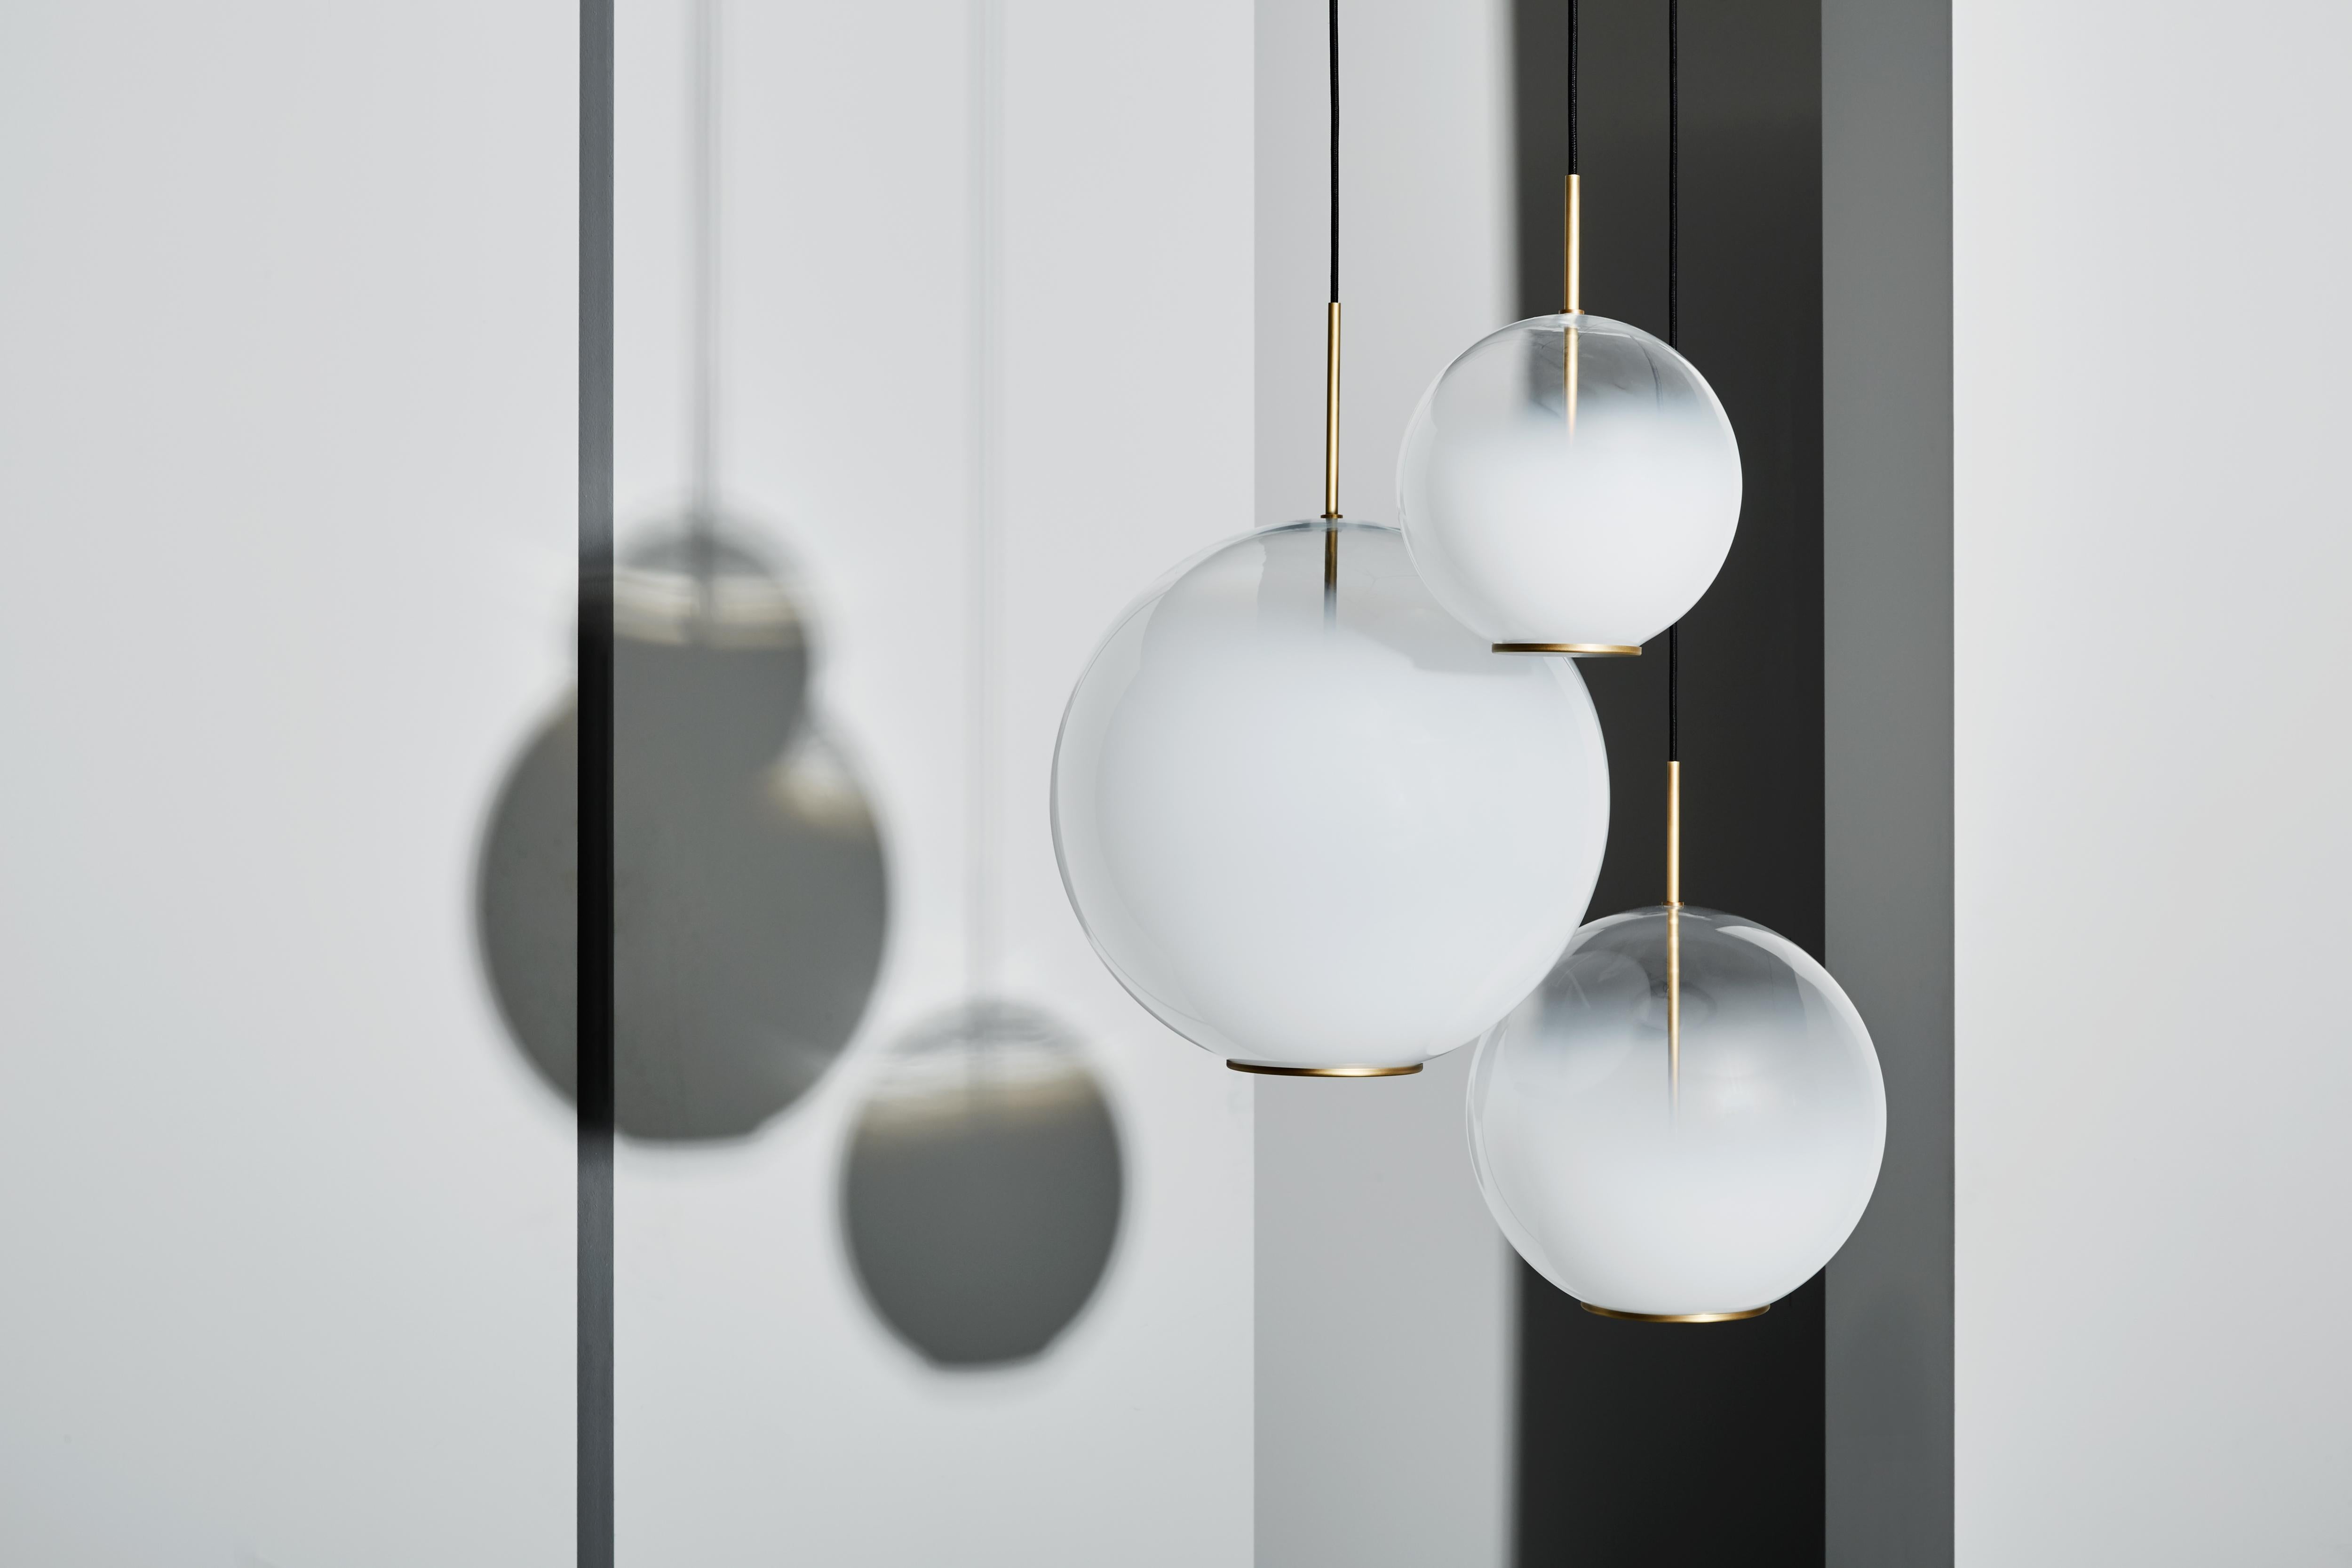 Suspended lamp with diffused light. Natural burnished brass structure and white blending blown glass diffuser.

Also available in additional sizes.

Location: Interior
Light Source: 1×5W LED 10V 676lm 2700°K CRI80-Dimmable 1-10V
Voltage: 110 -